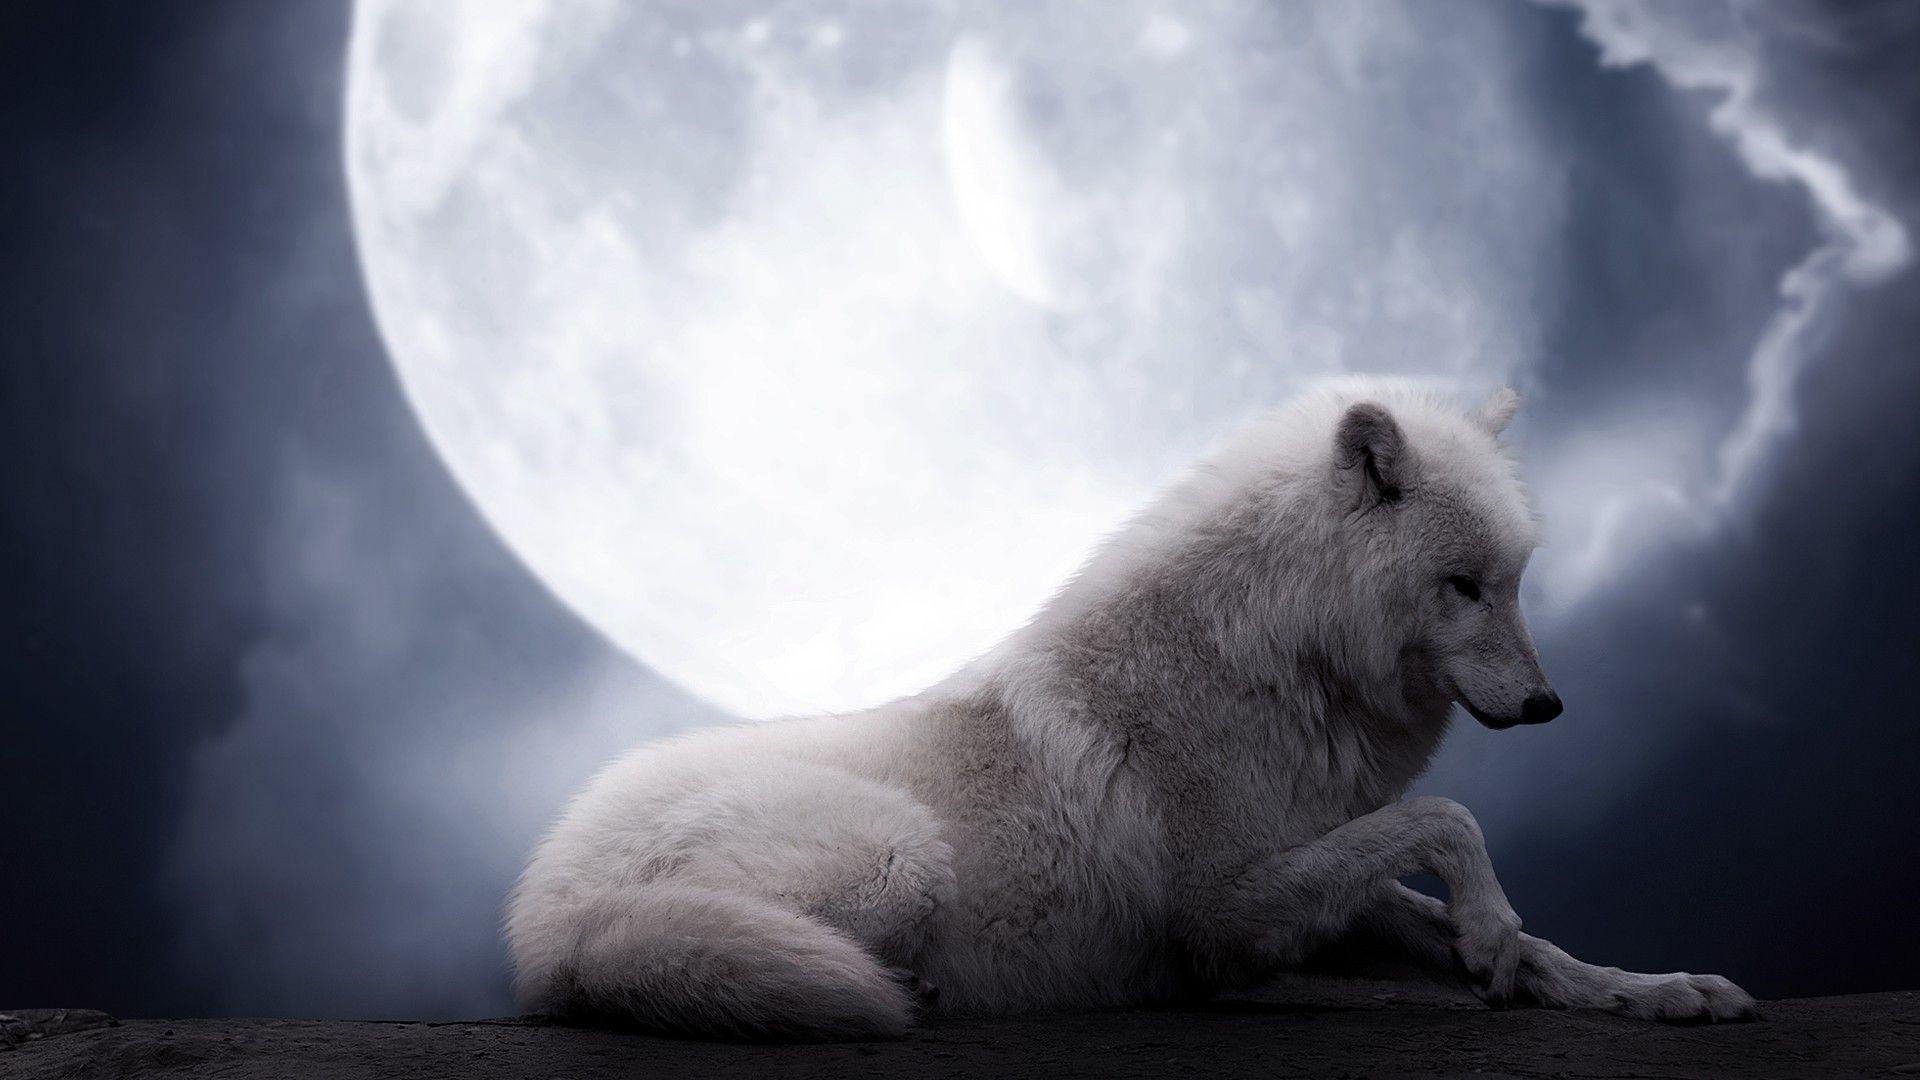 Wolf, moon, night. iPhone wallpaper for free